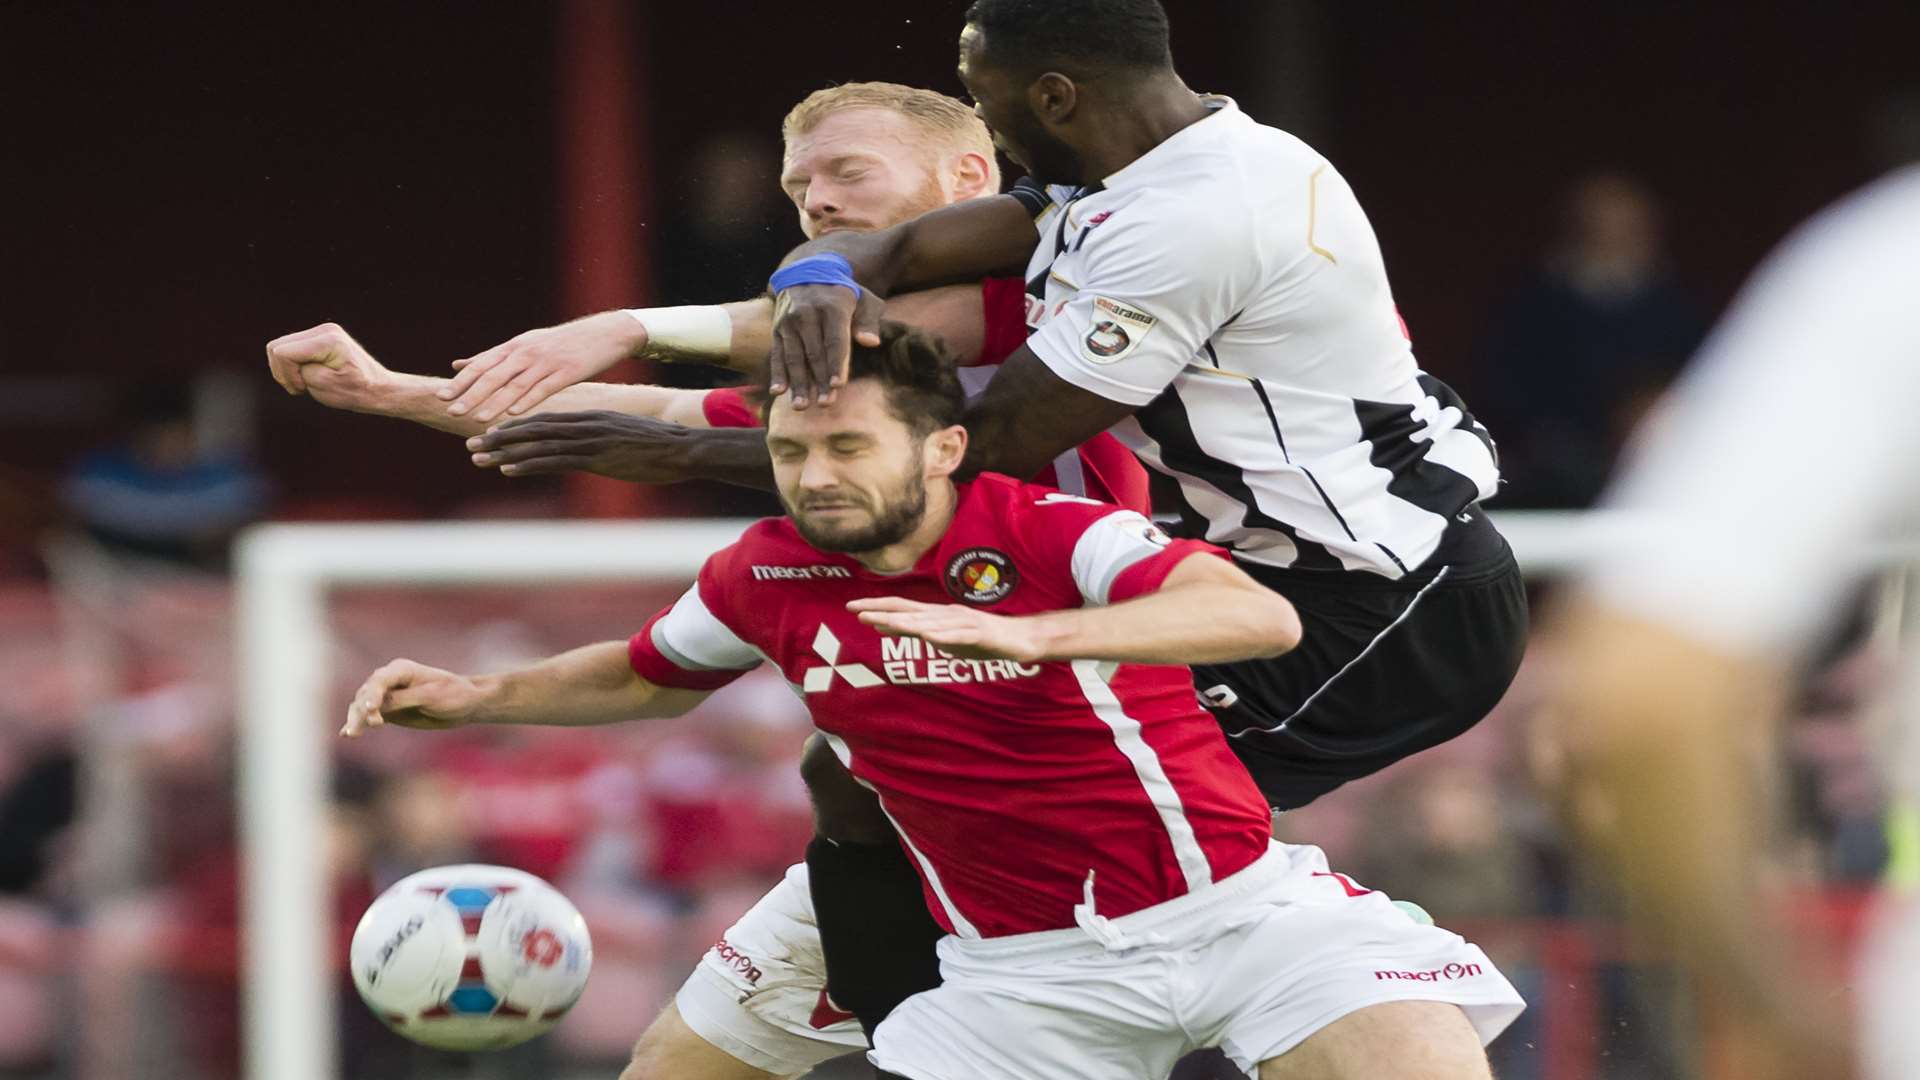 Ebbsfleet's Dean Rance feels the full force of this challenge against Bath City Picture: Andy Payton